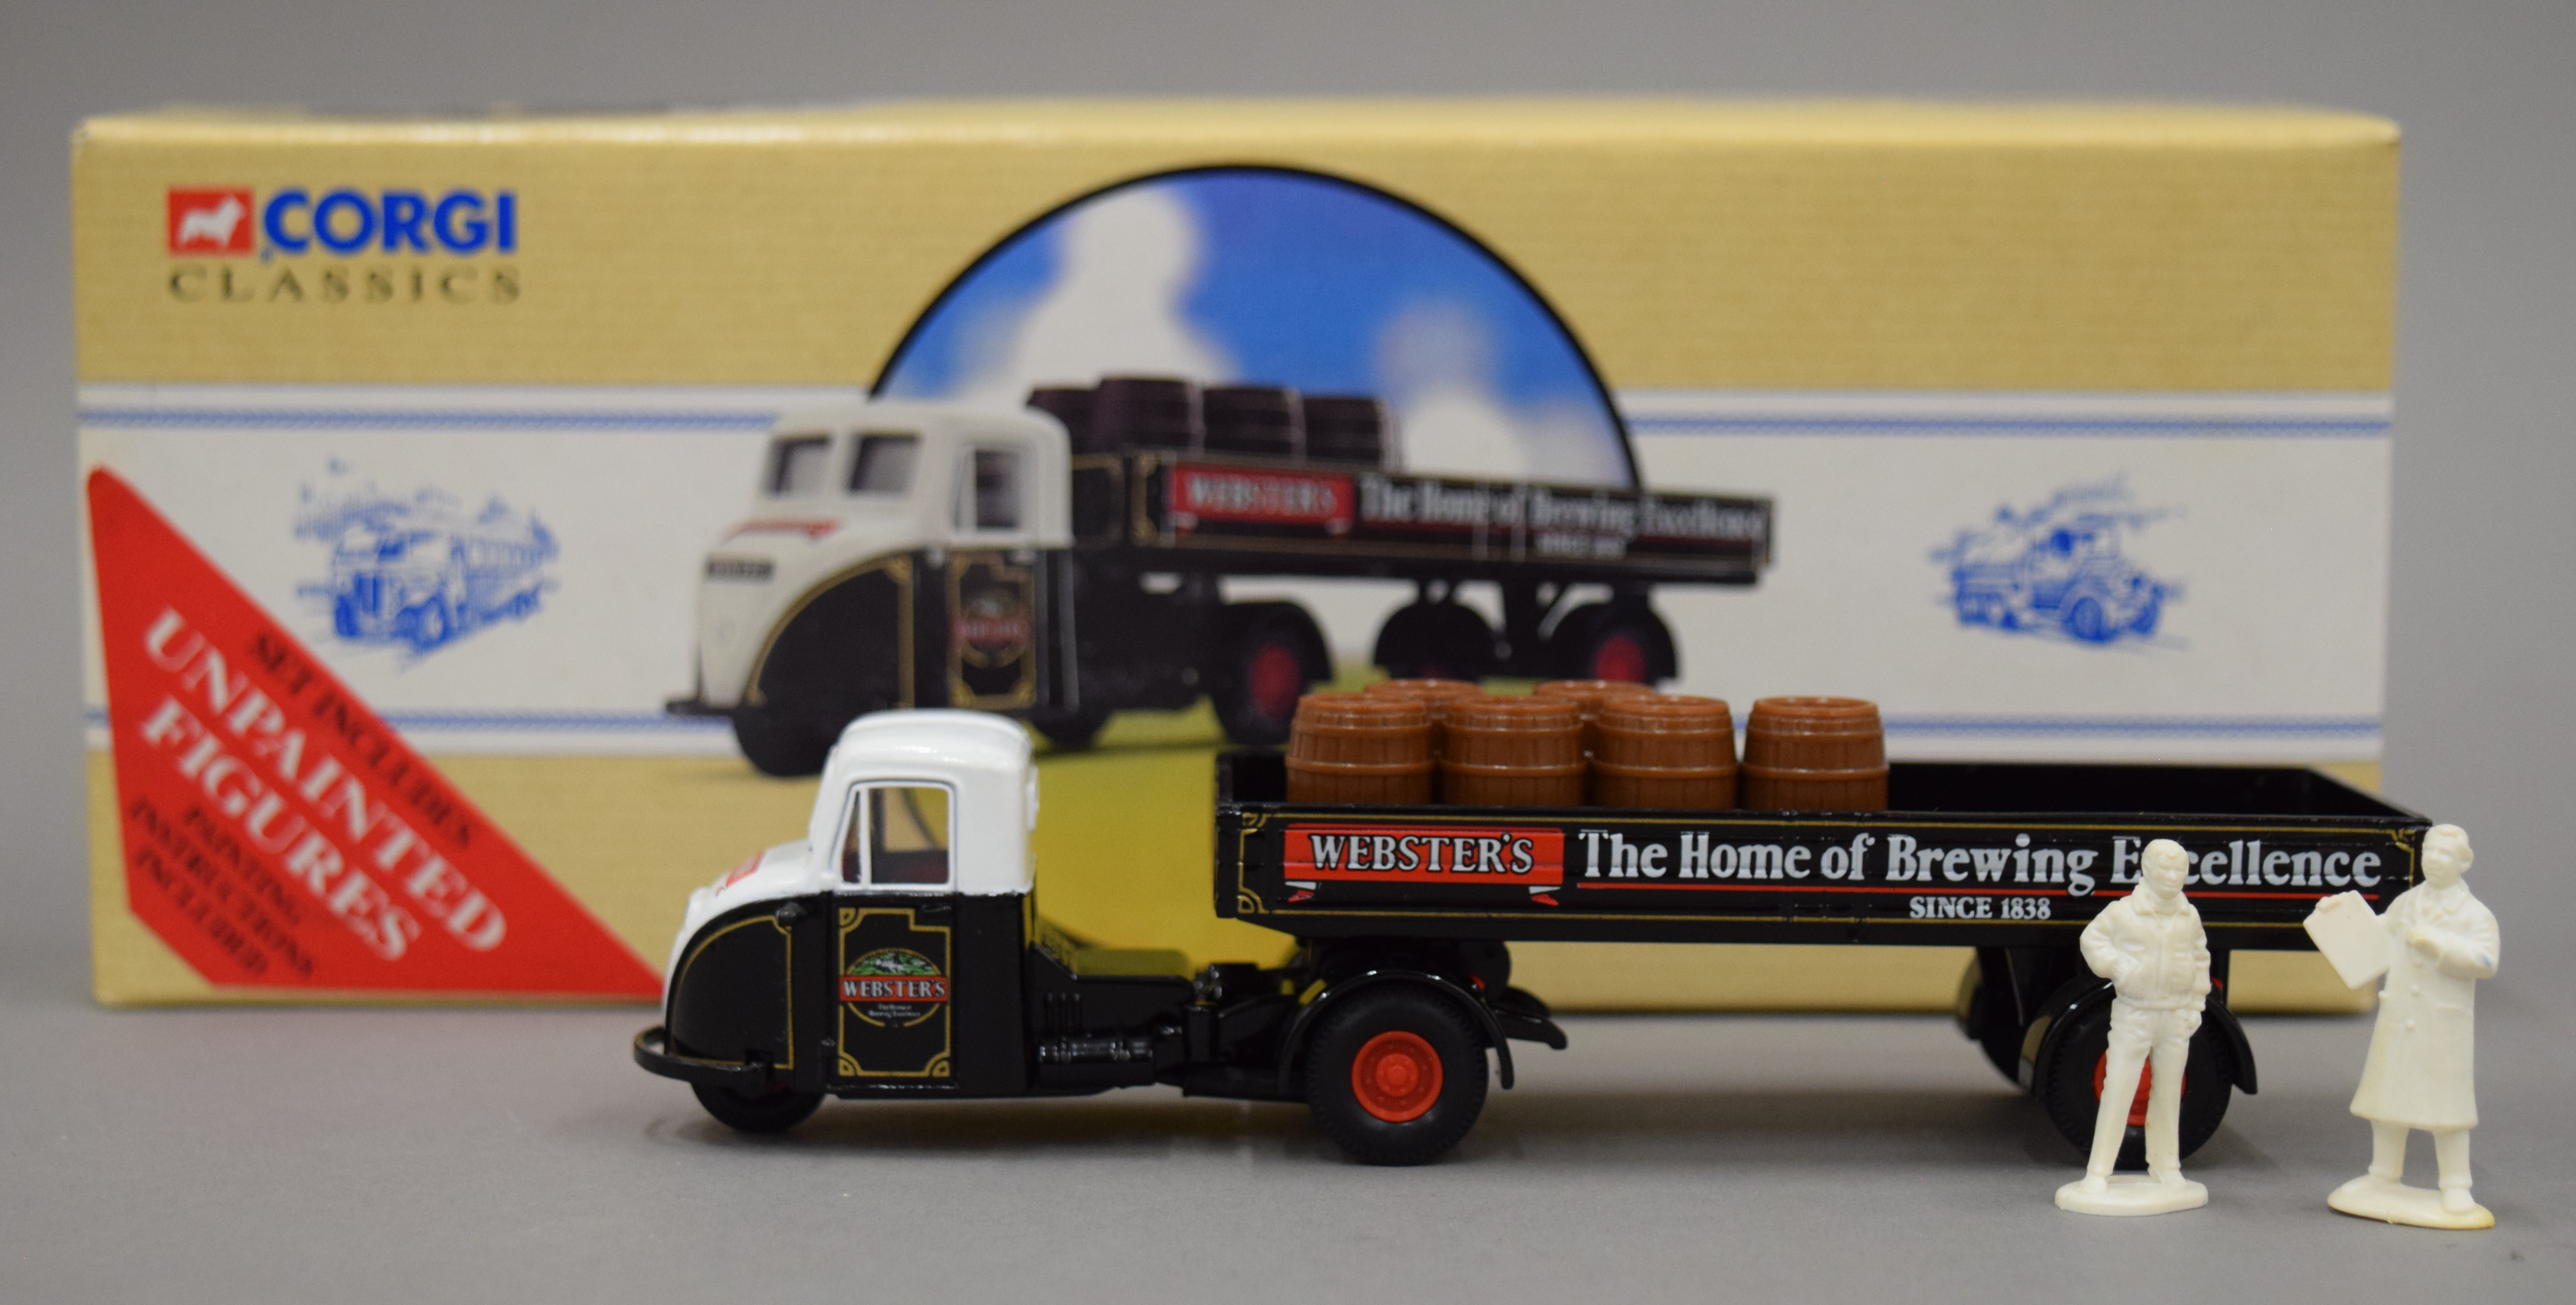 A Corgi Classics Scammel Scarab three-wheeler cab and trailer badges Webster's brewery.